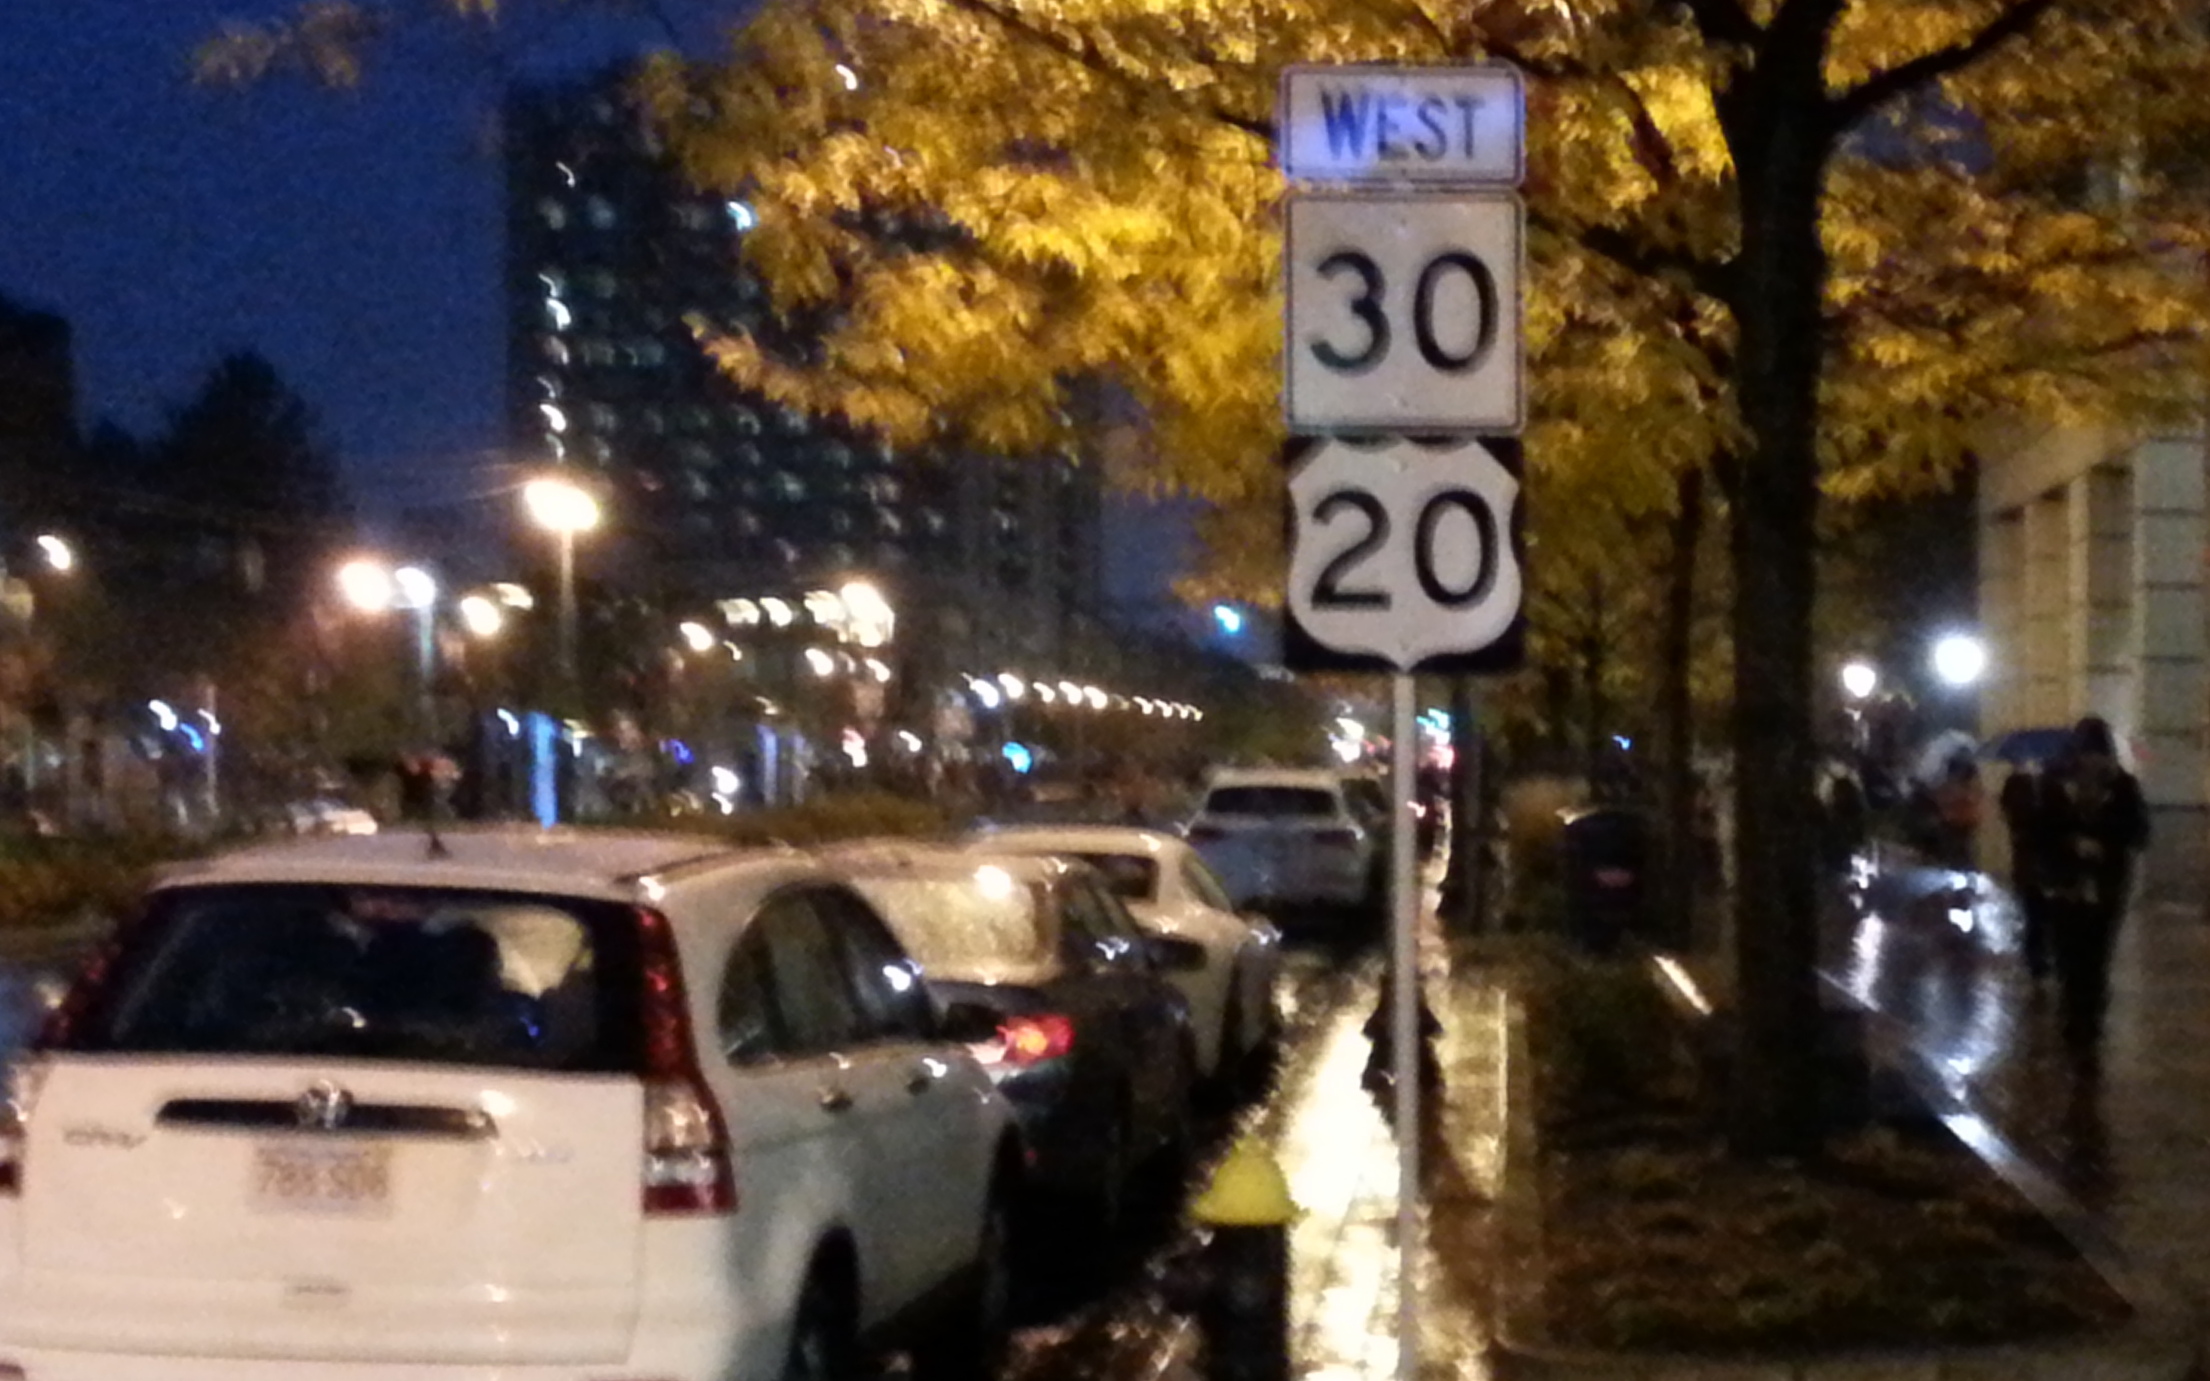 Photo of MA 30/US 20 sign along Comm Ave (in rain) near Kenmore Square in Boston